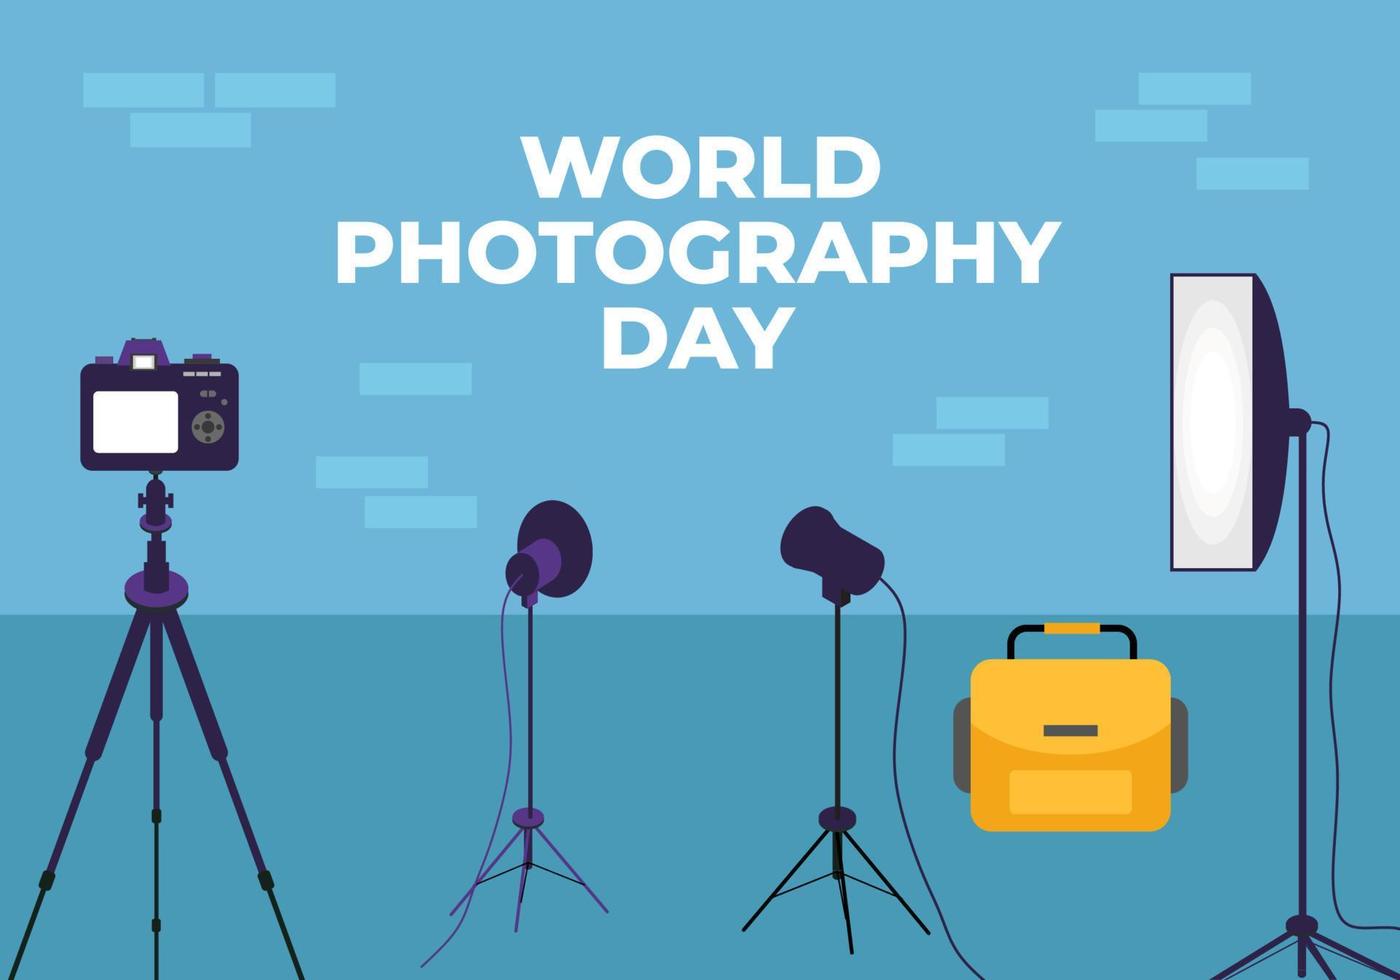 World photography day banner poster on august 19 with studio photo set on blue background. vector